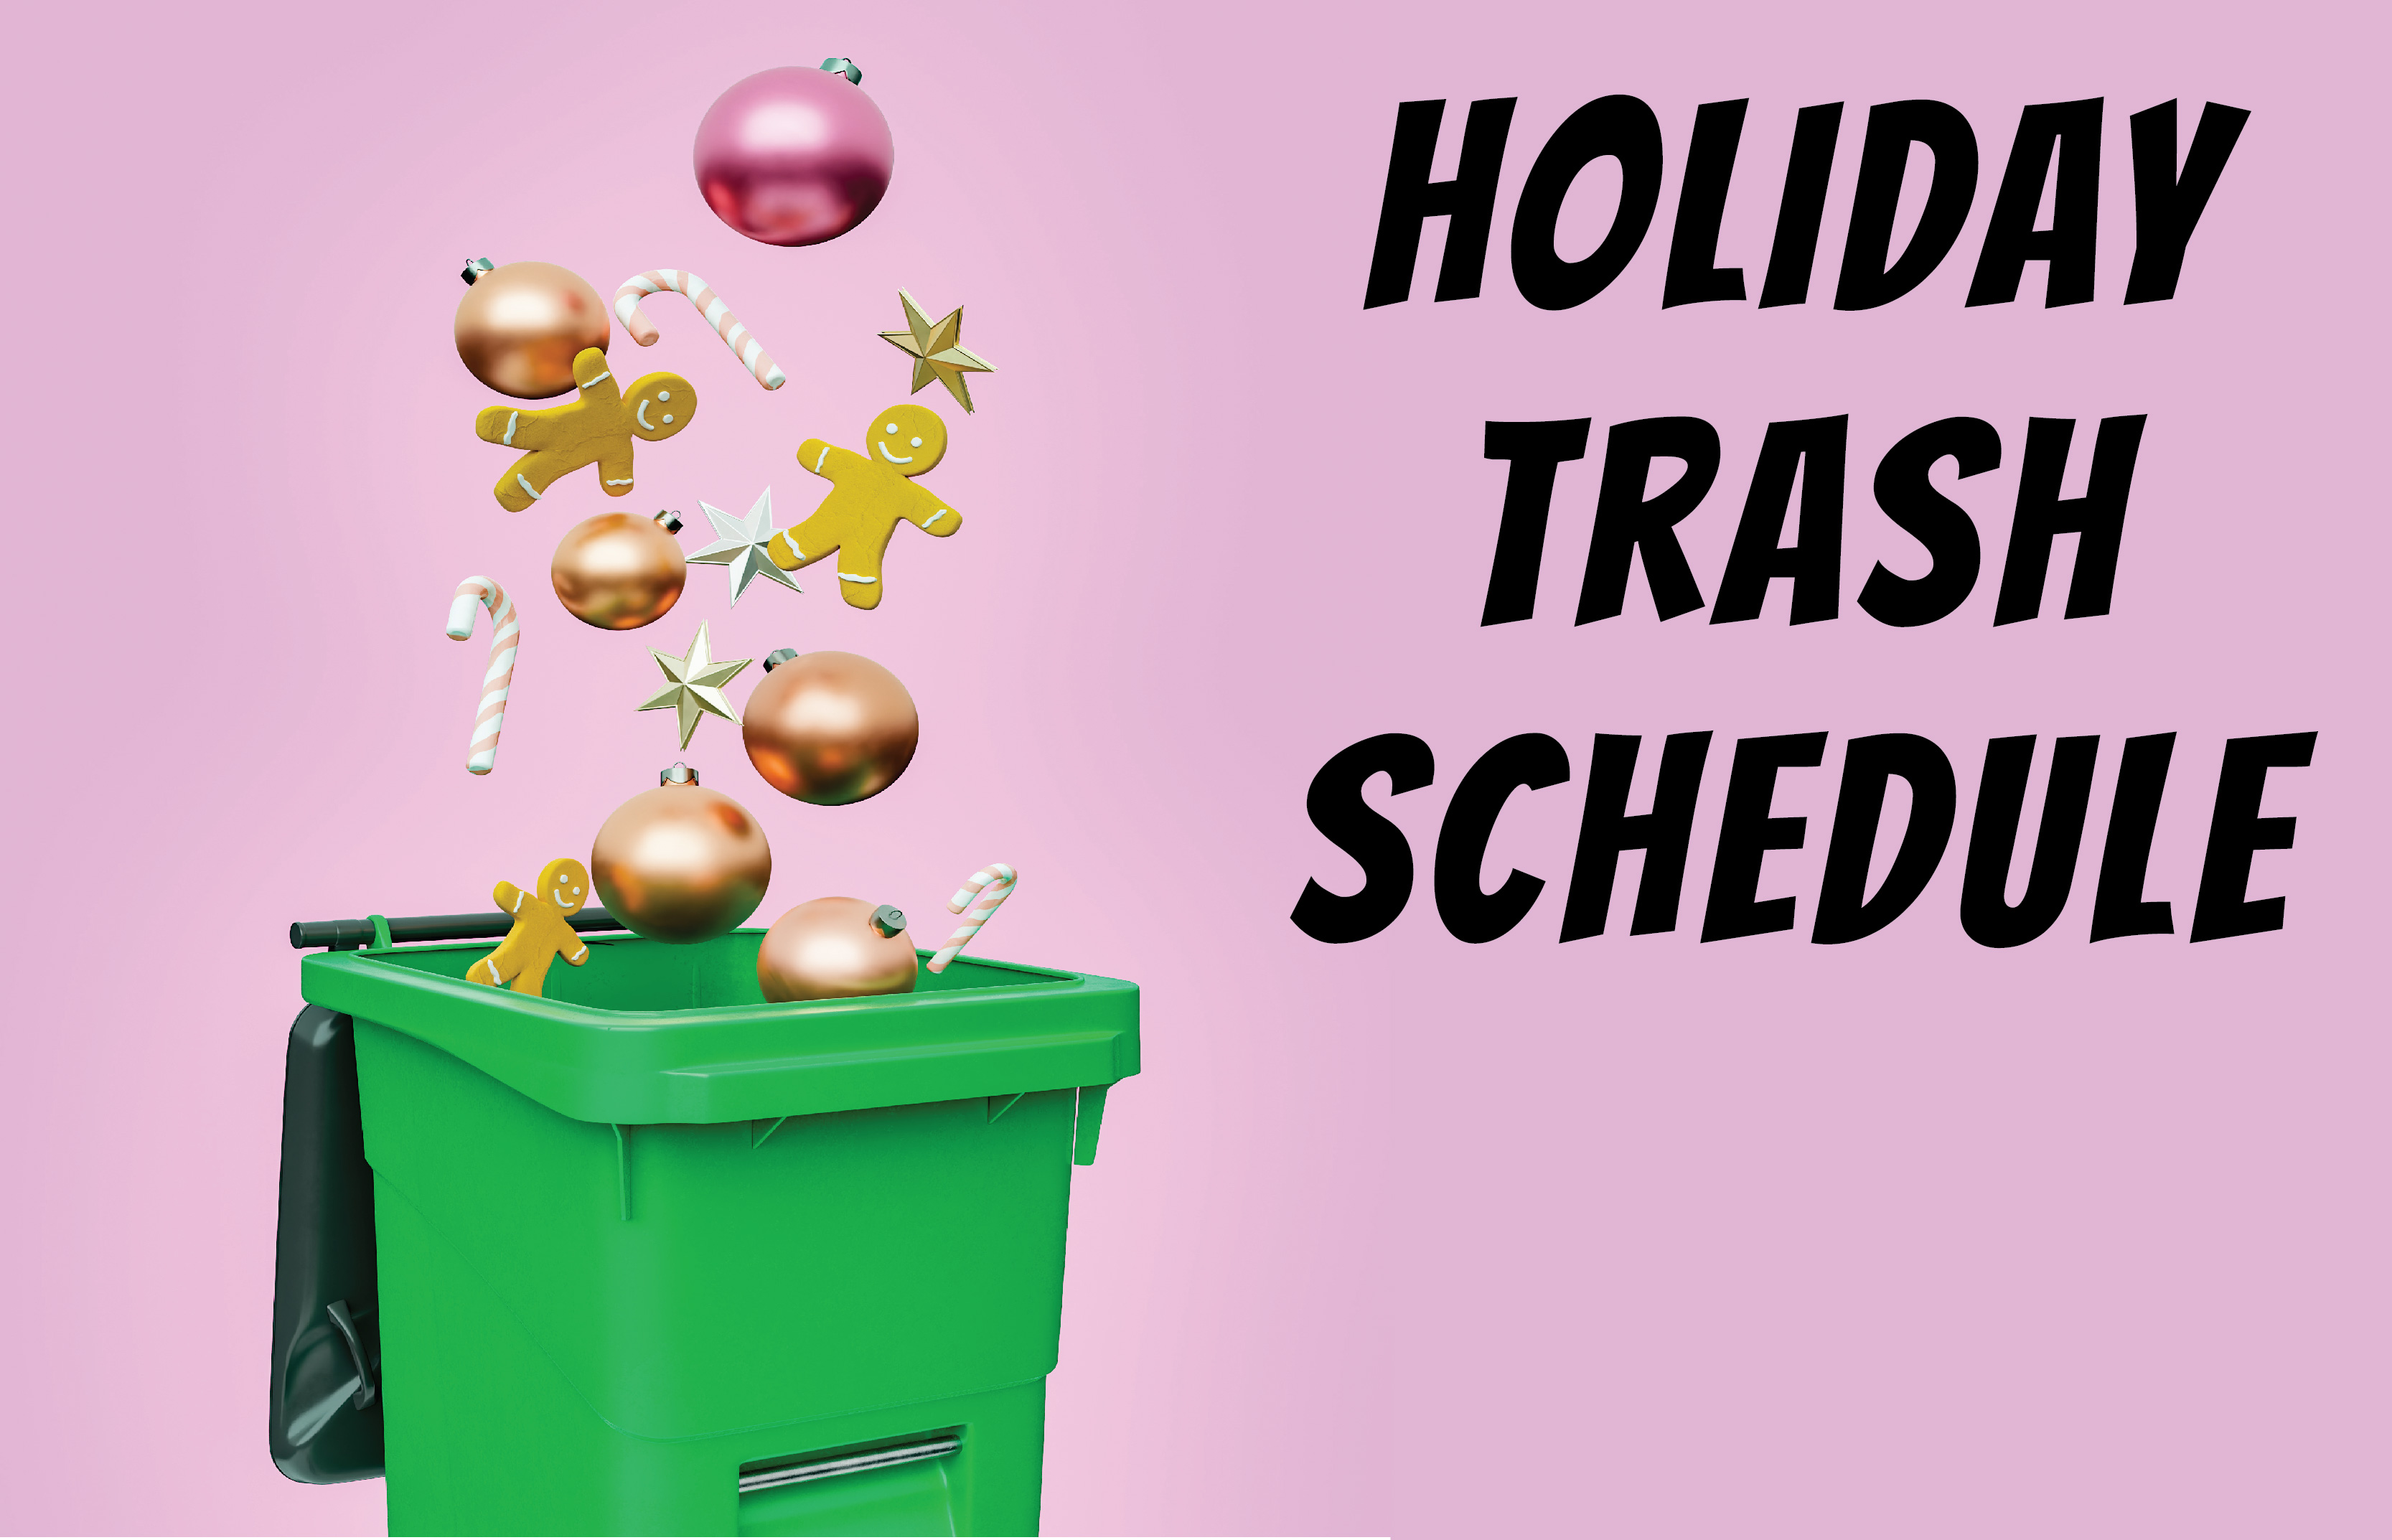 Trash Service Over the Holidays in Weston Lakes